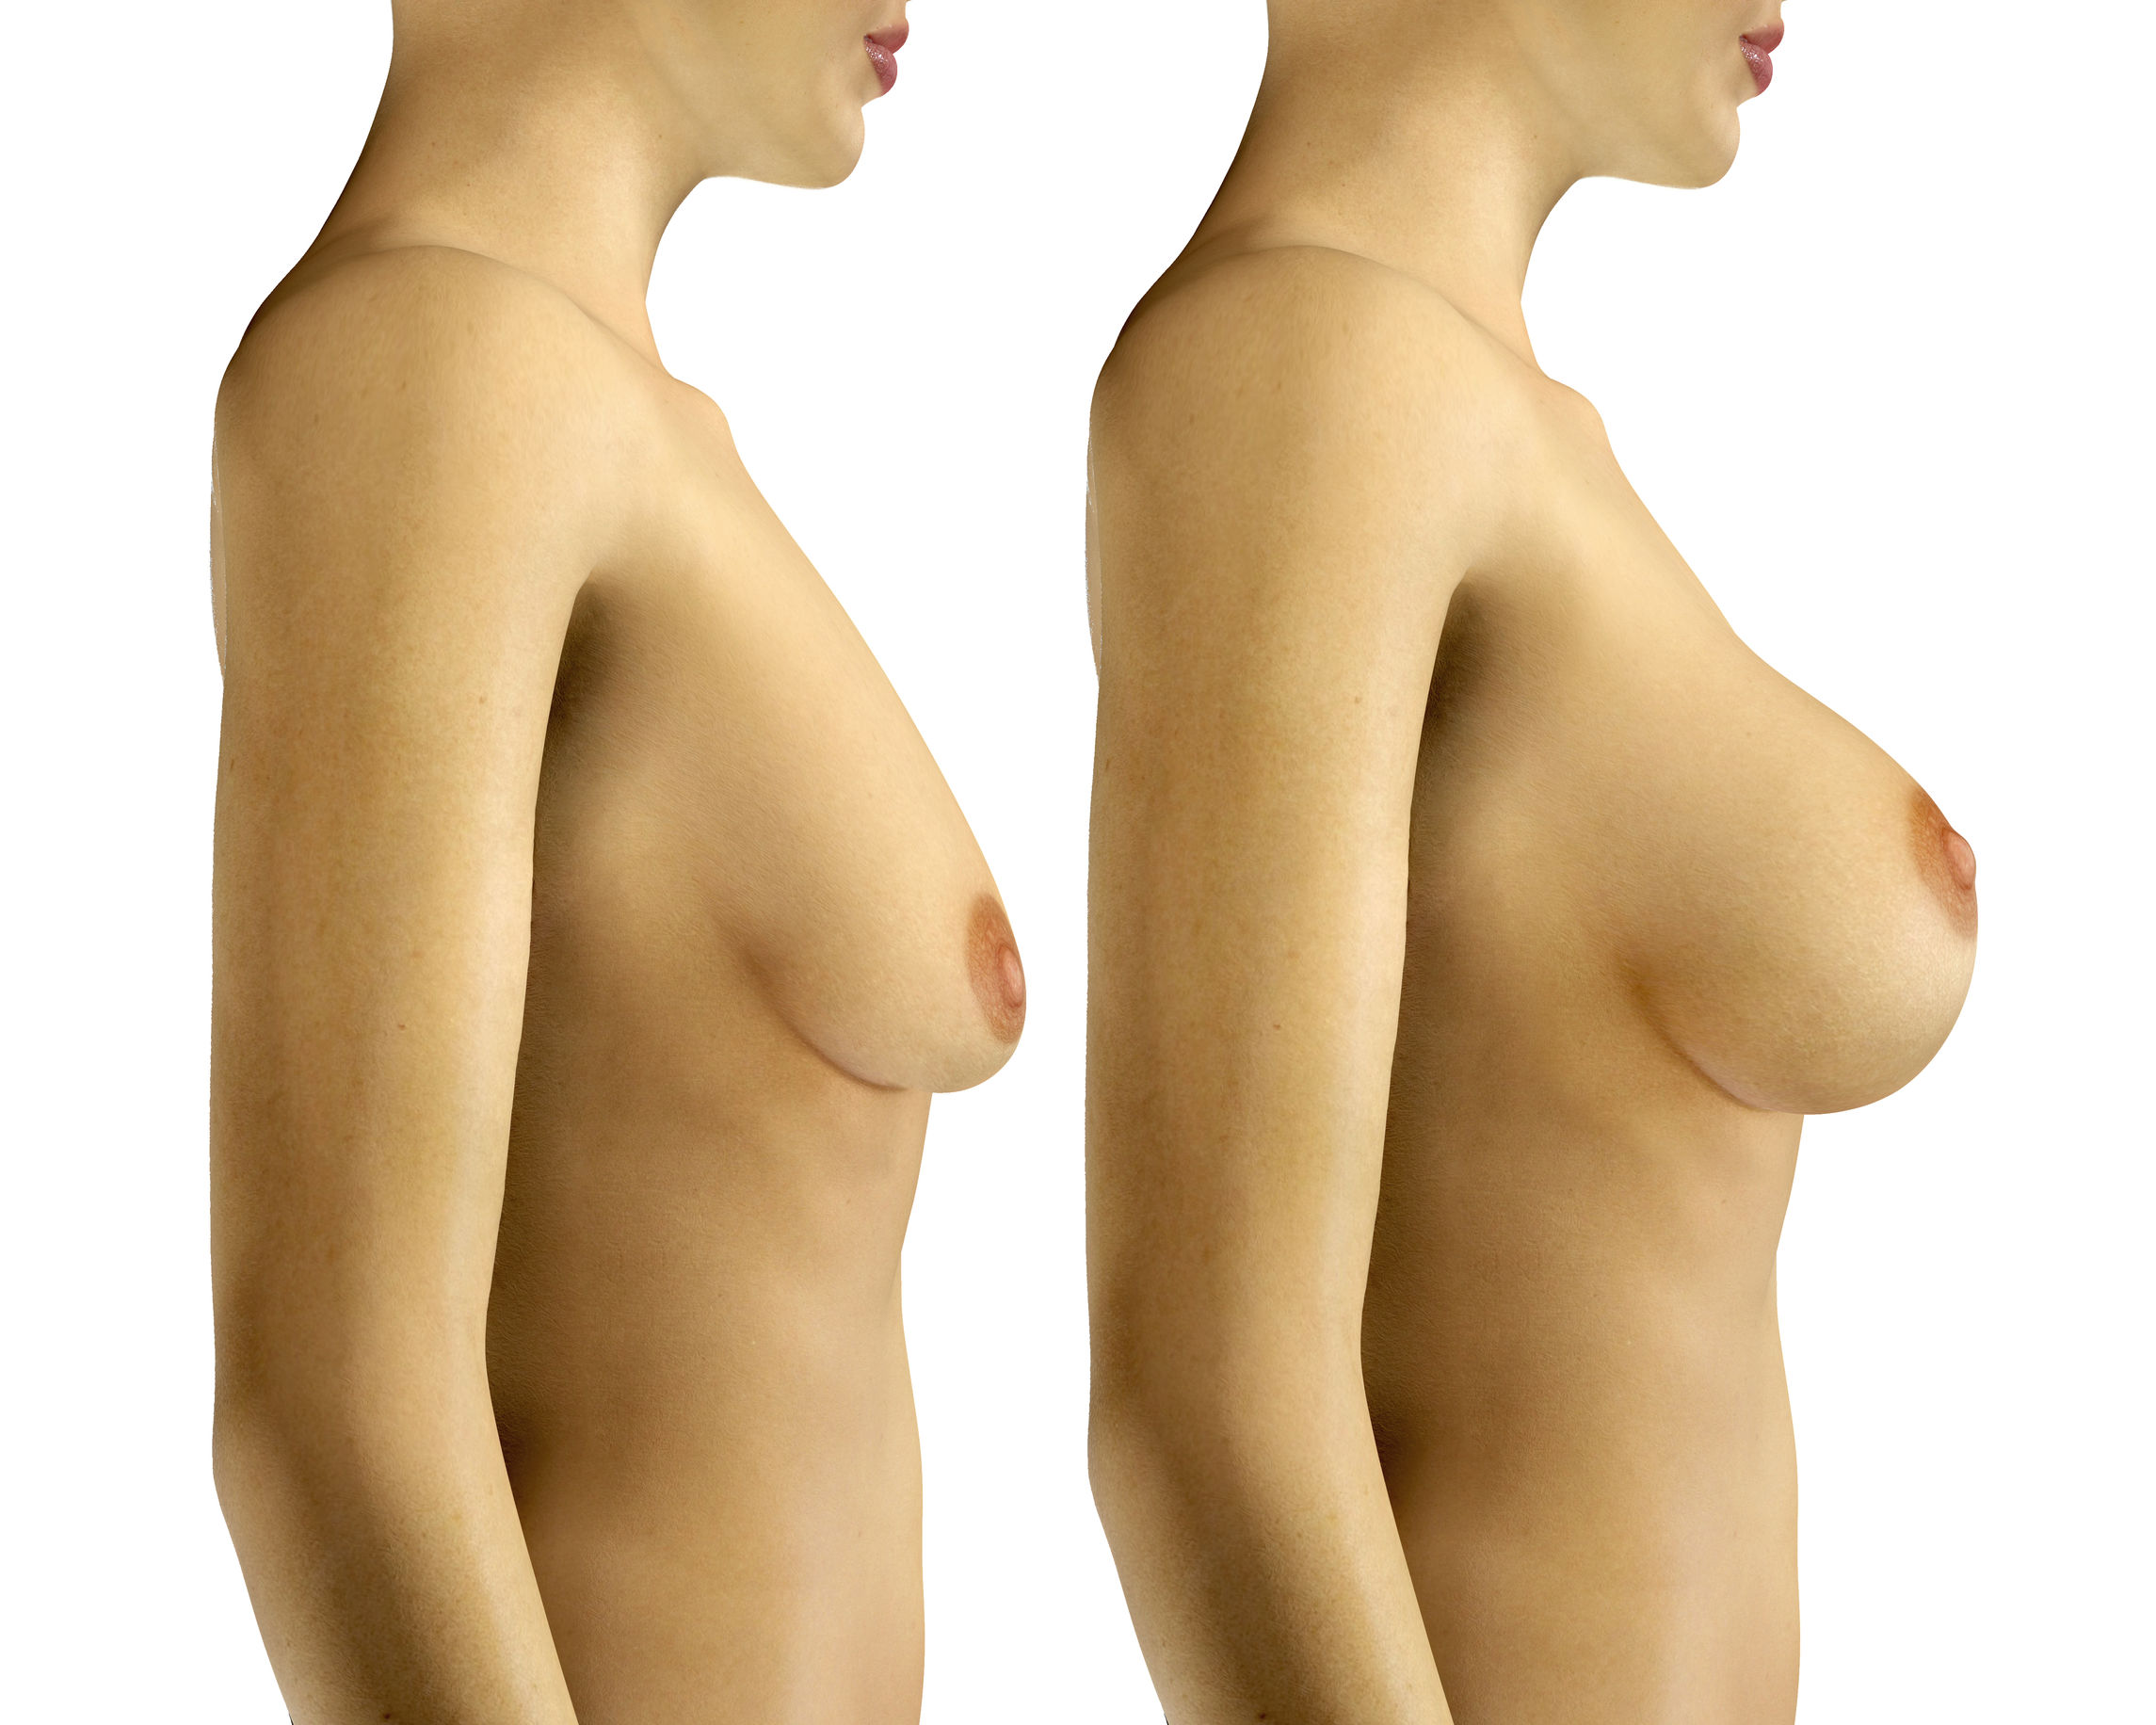 Rapid Recovery Breast Augmentation